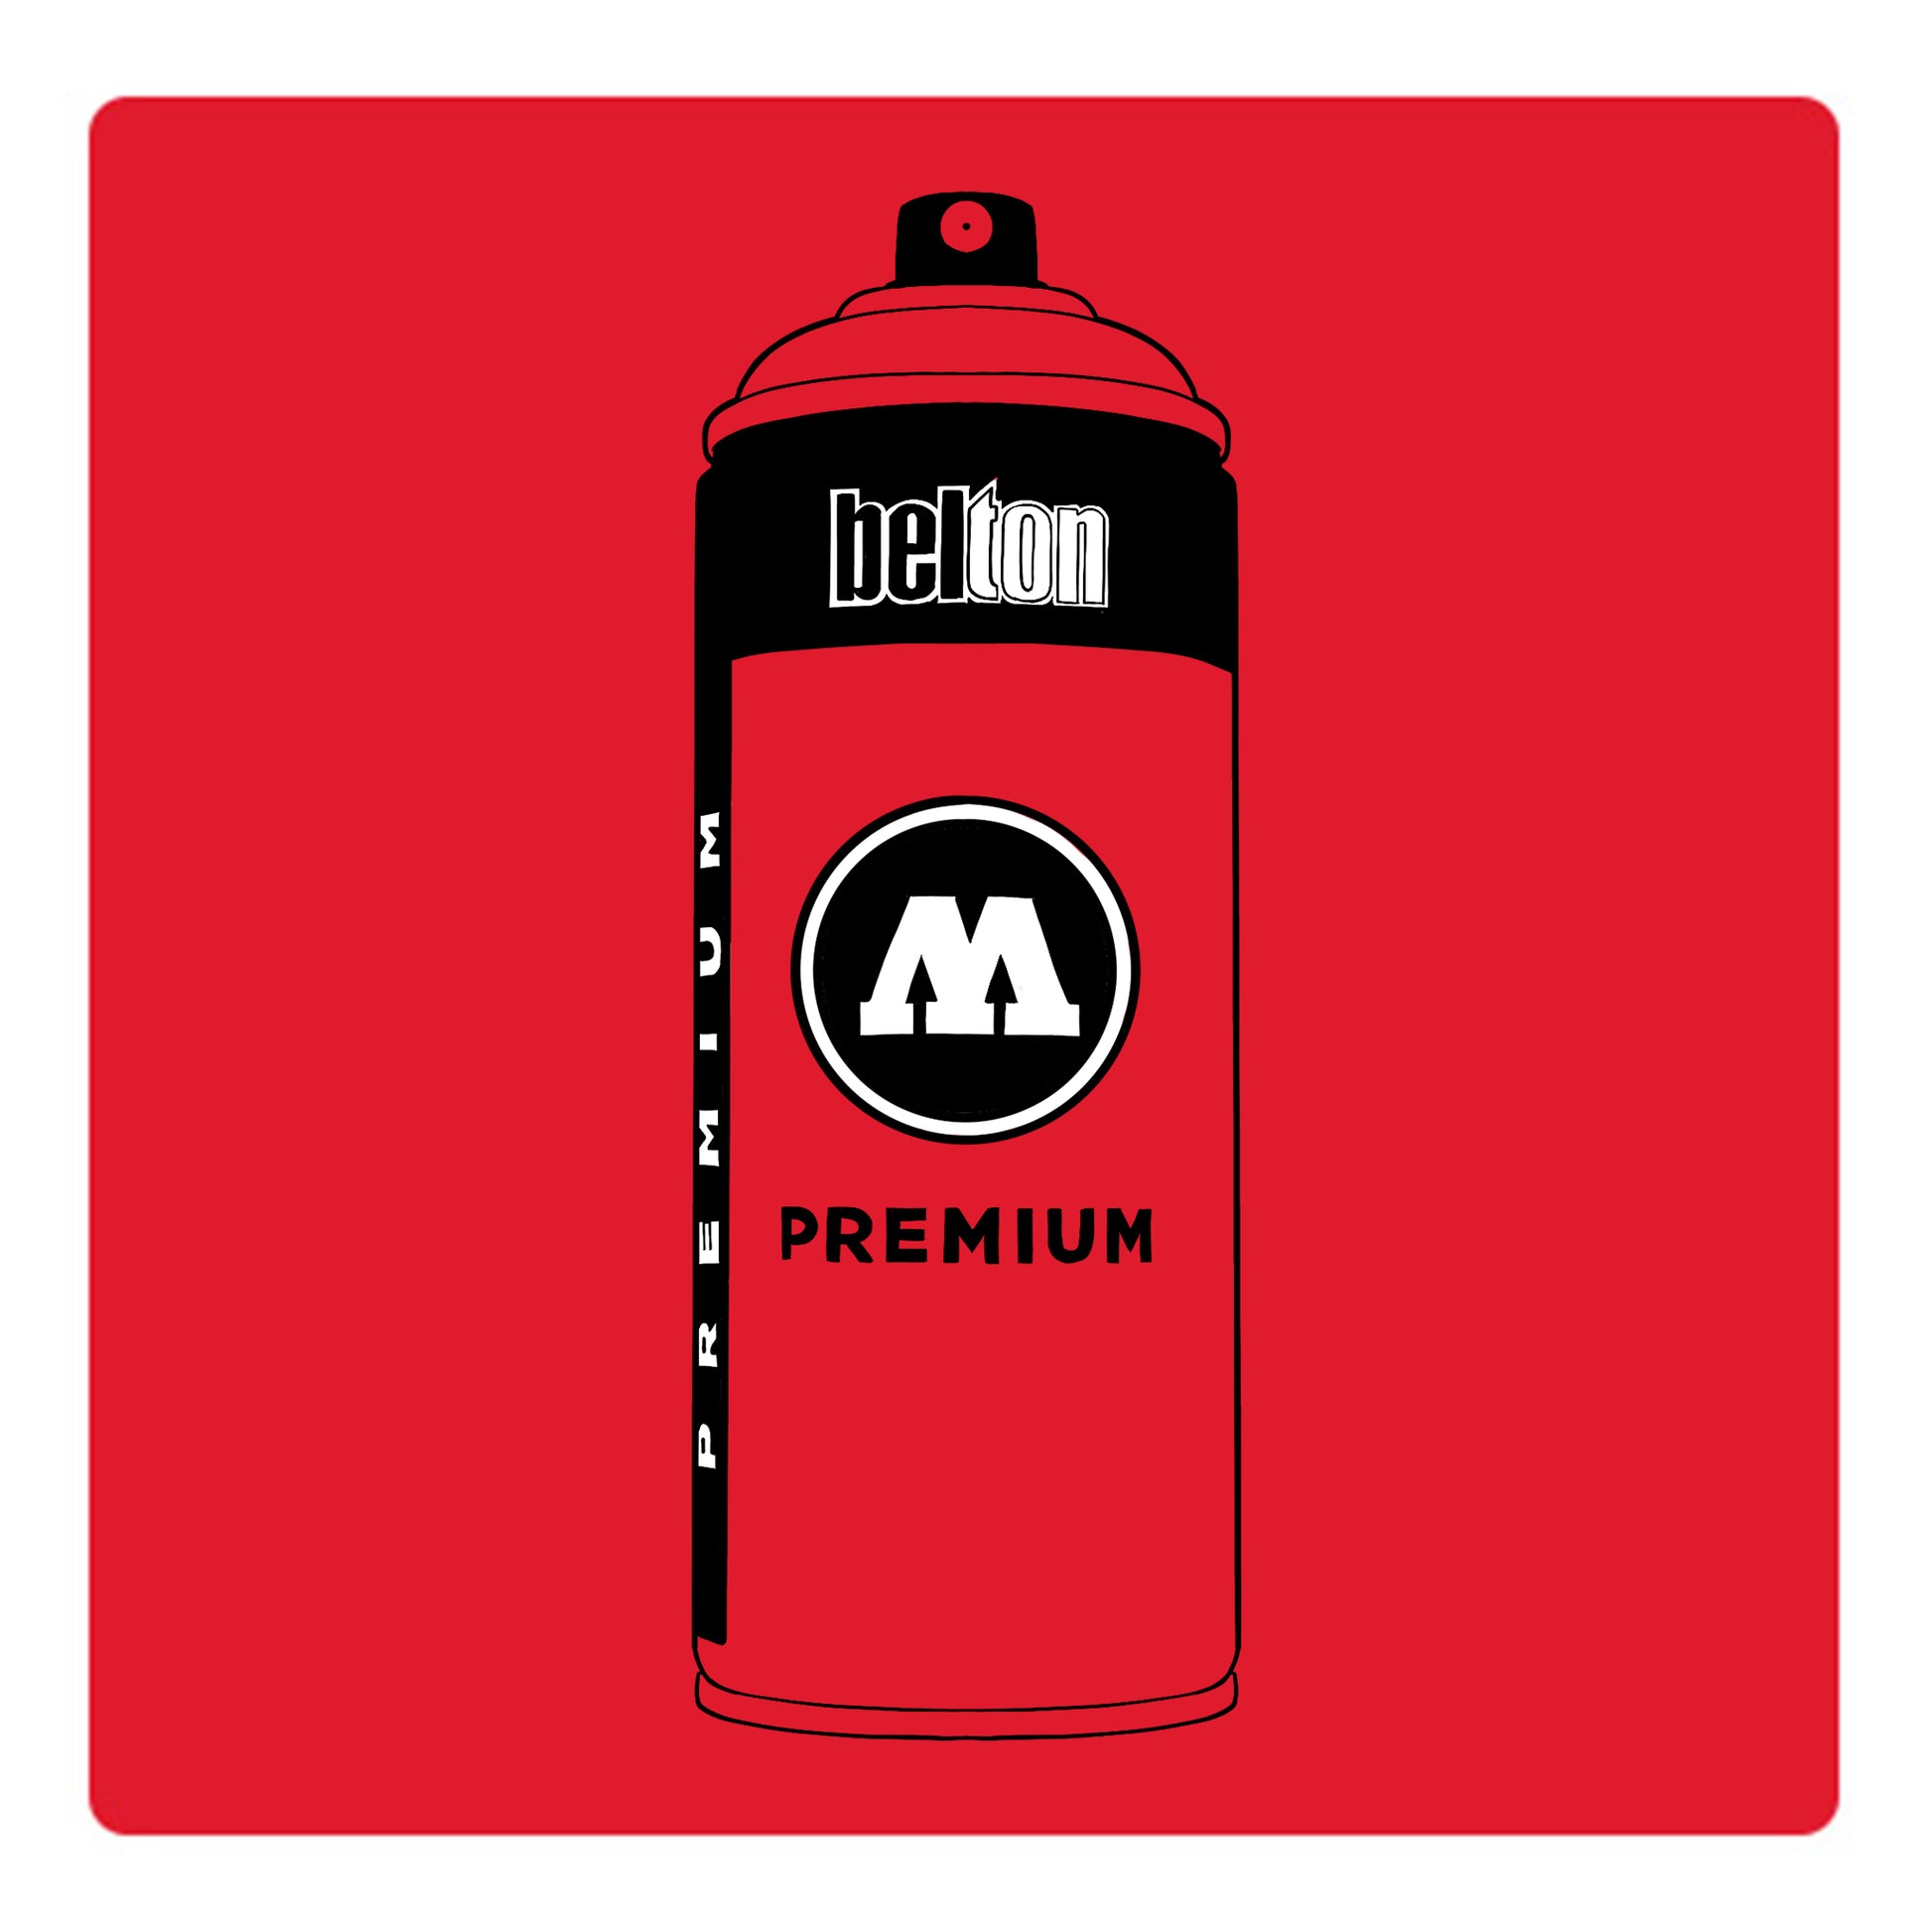 A black outline drawing of a bright red spray paint can with the words "belton","premium" and the letter"M" written on the face in black and white font. The background is a color swatch of the same bright red with a white border.